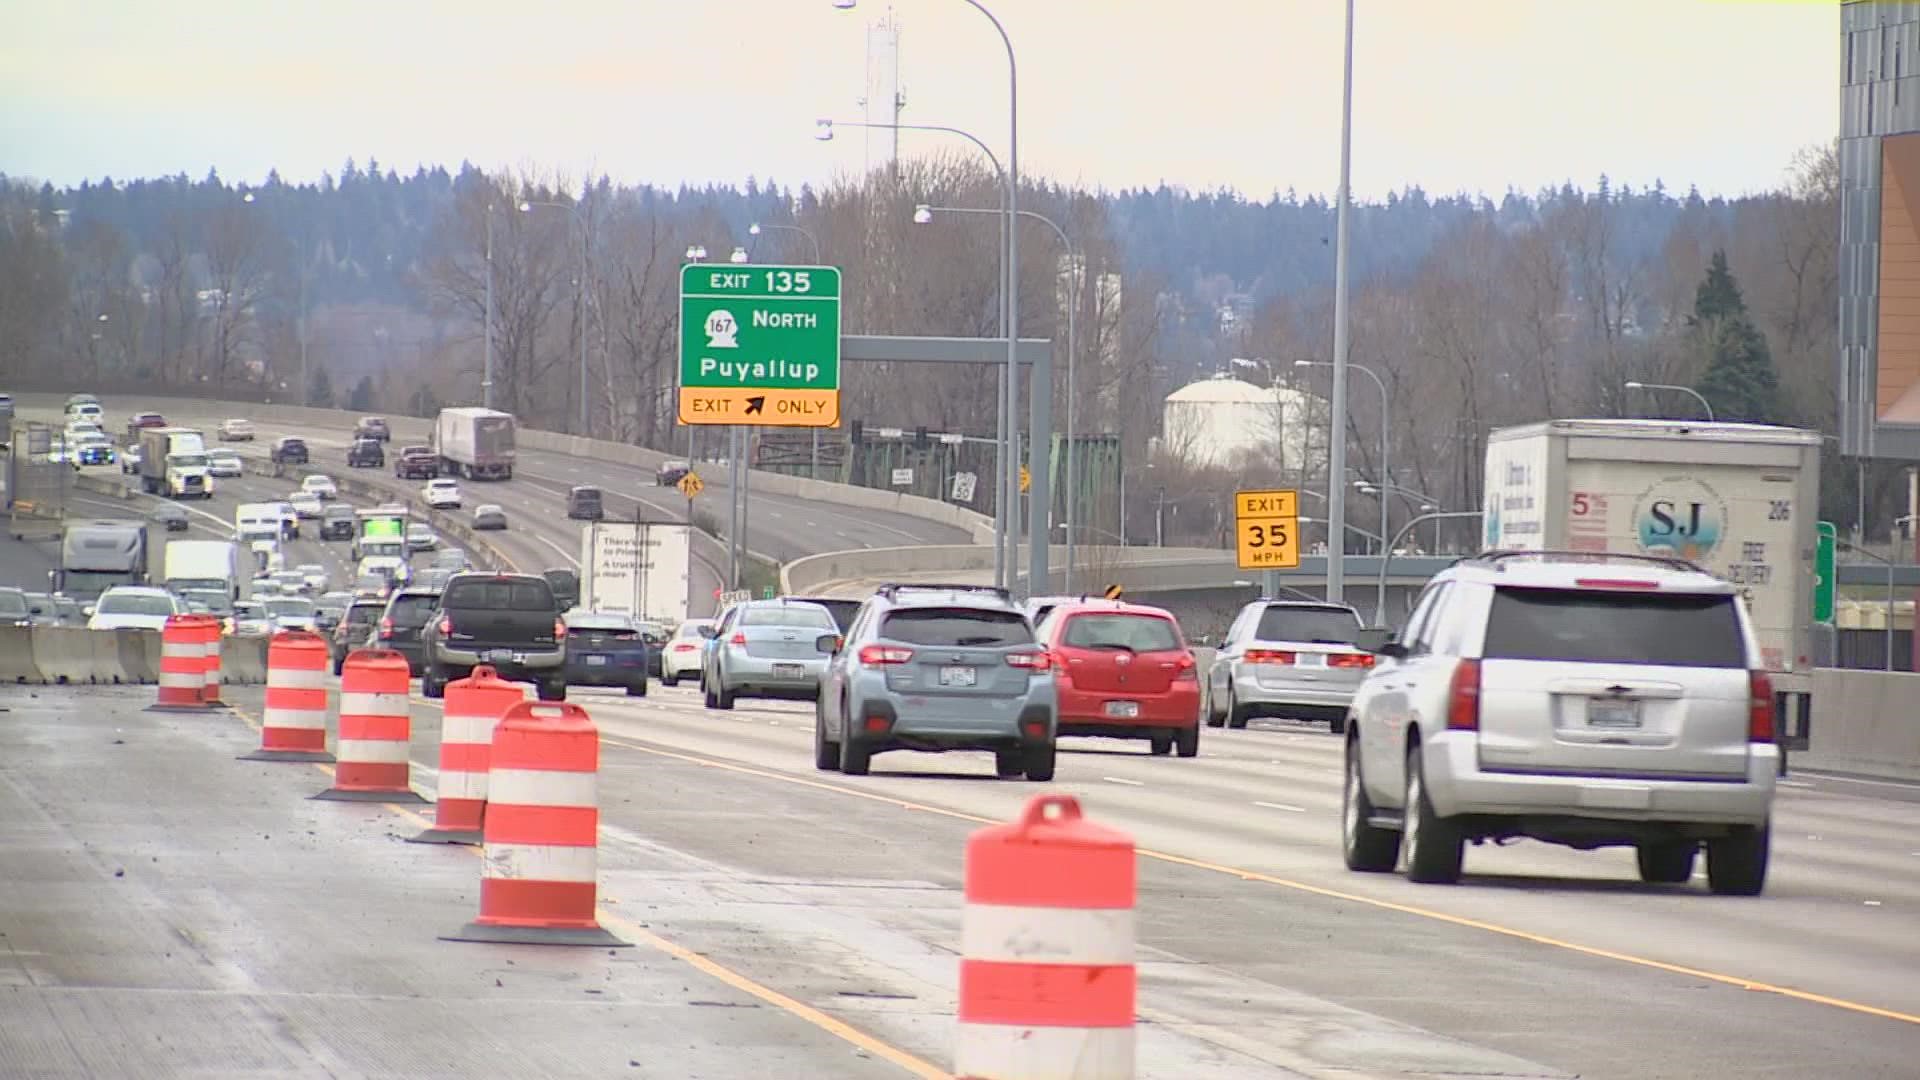 State troopers say they’re seeing more fatal collisions on I-5 in Pierce County than ever before.